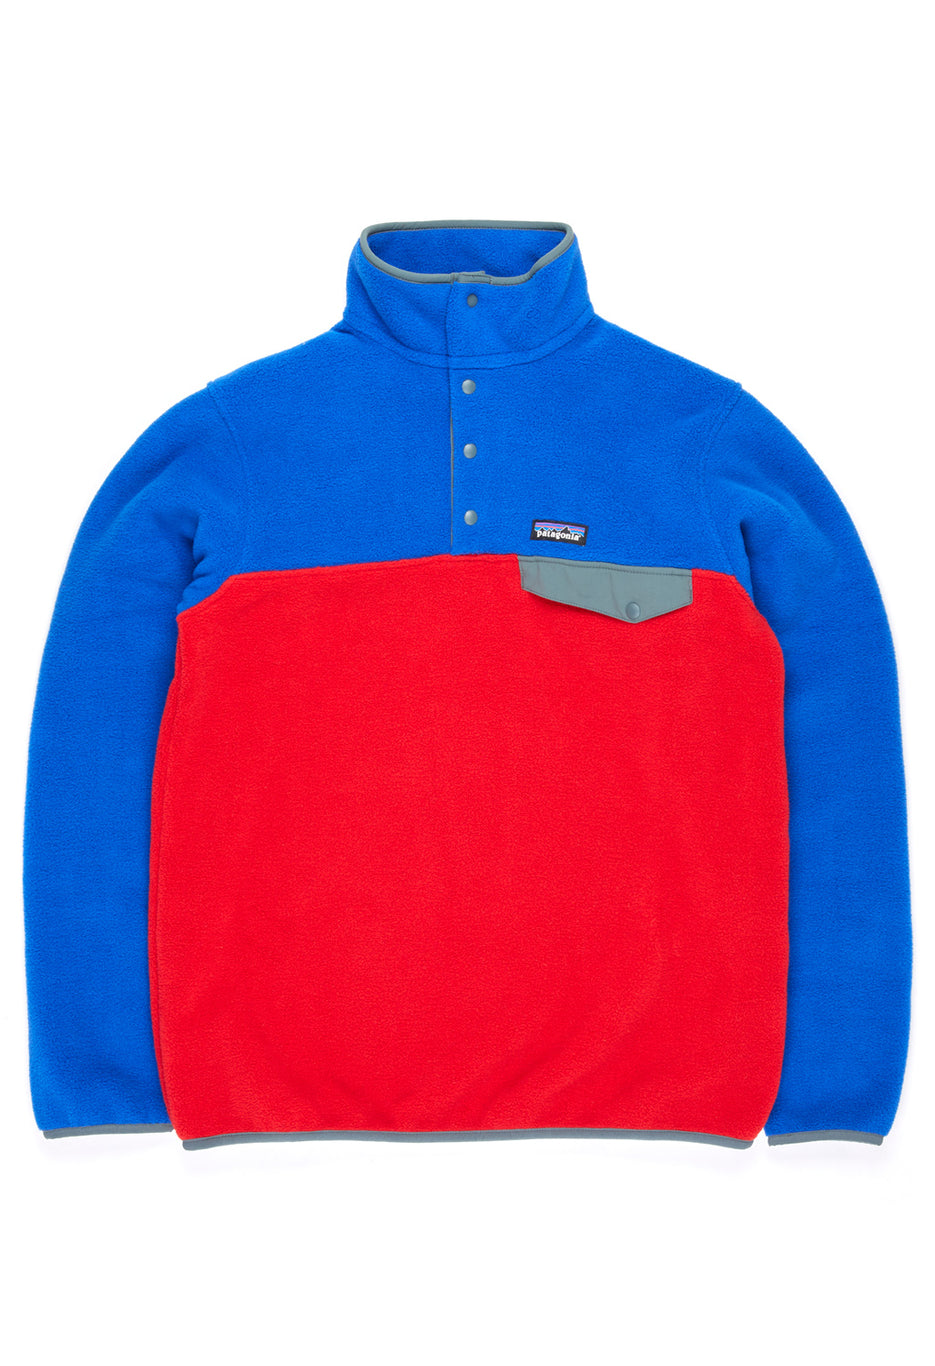 Patagonia Men's Lightweight Synchilla Snap-T Pullover - Touring Red